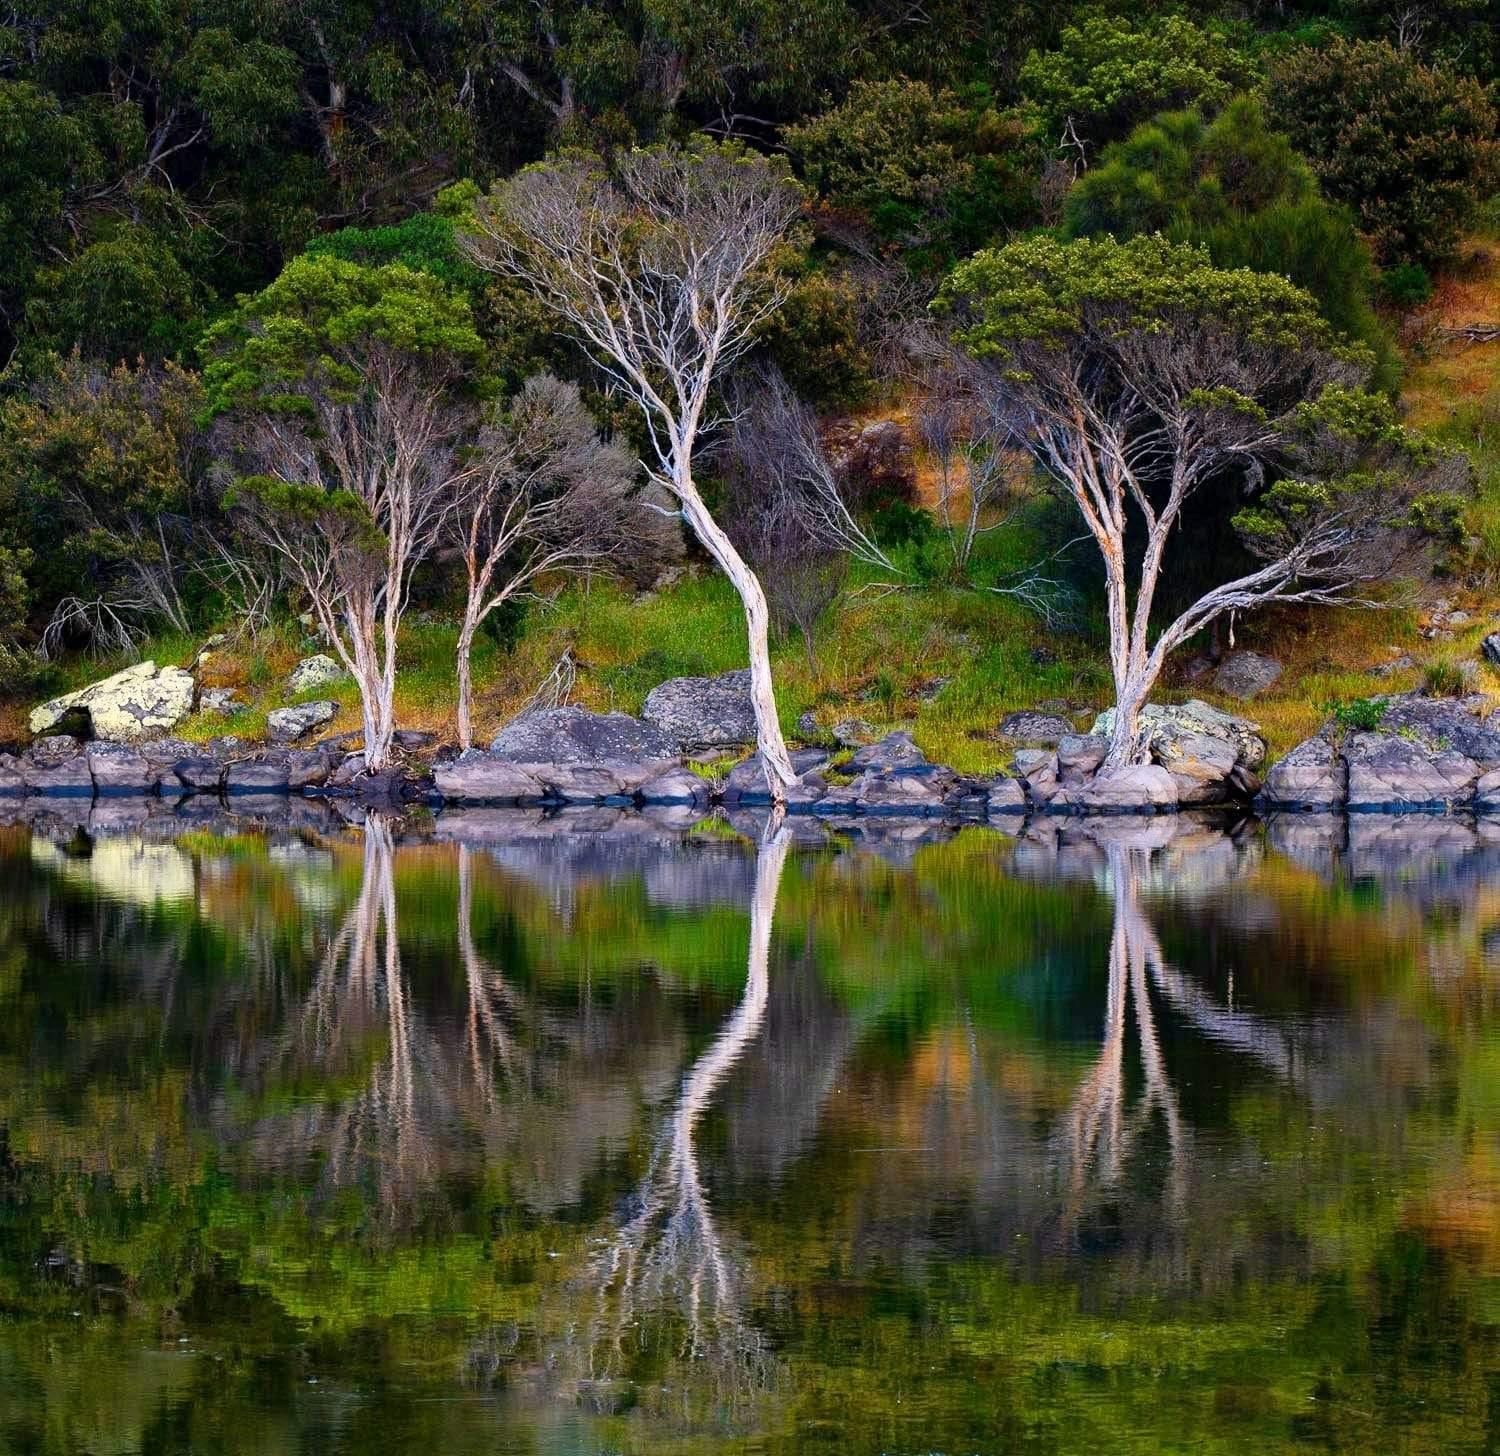 Beautiful lake with fully green surroundings, some trees and grass on the land making a clear reflection in the water, Chapman River - Kangaroo Island SA 